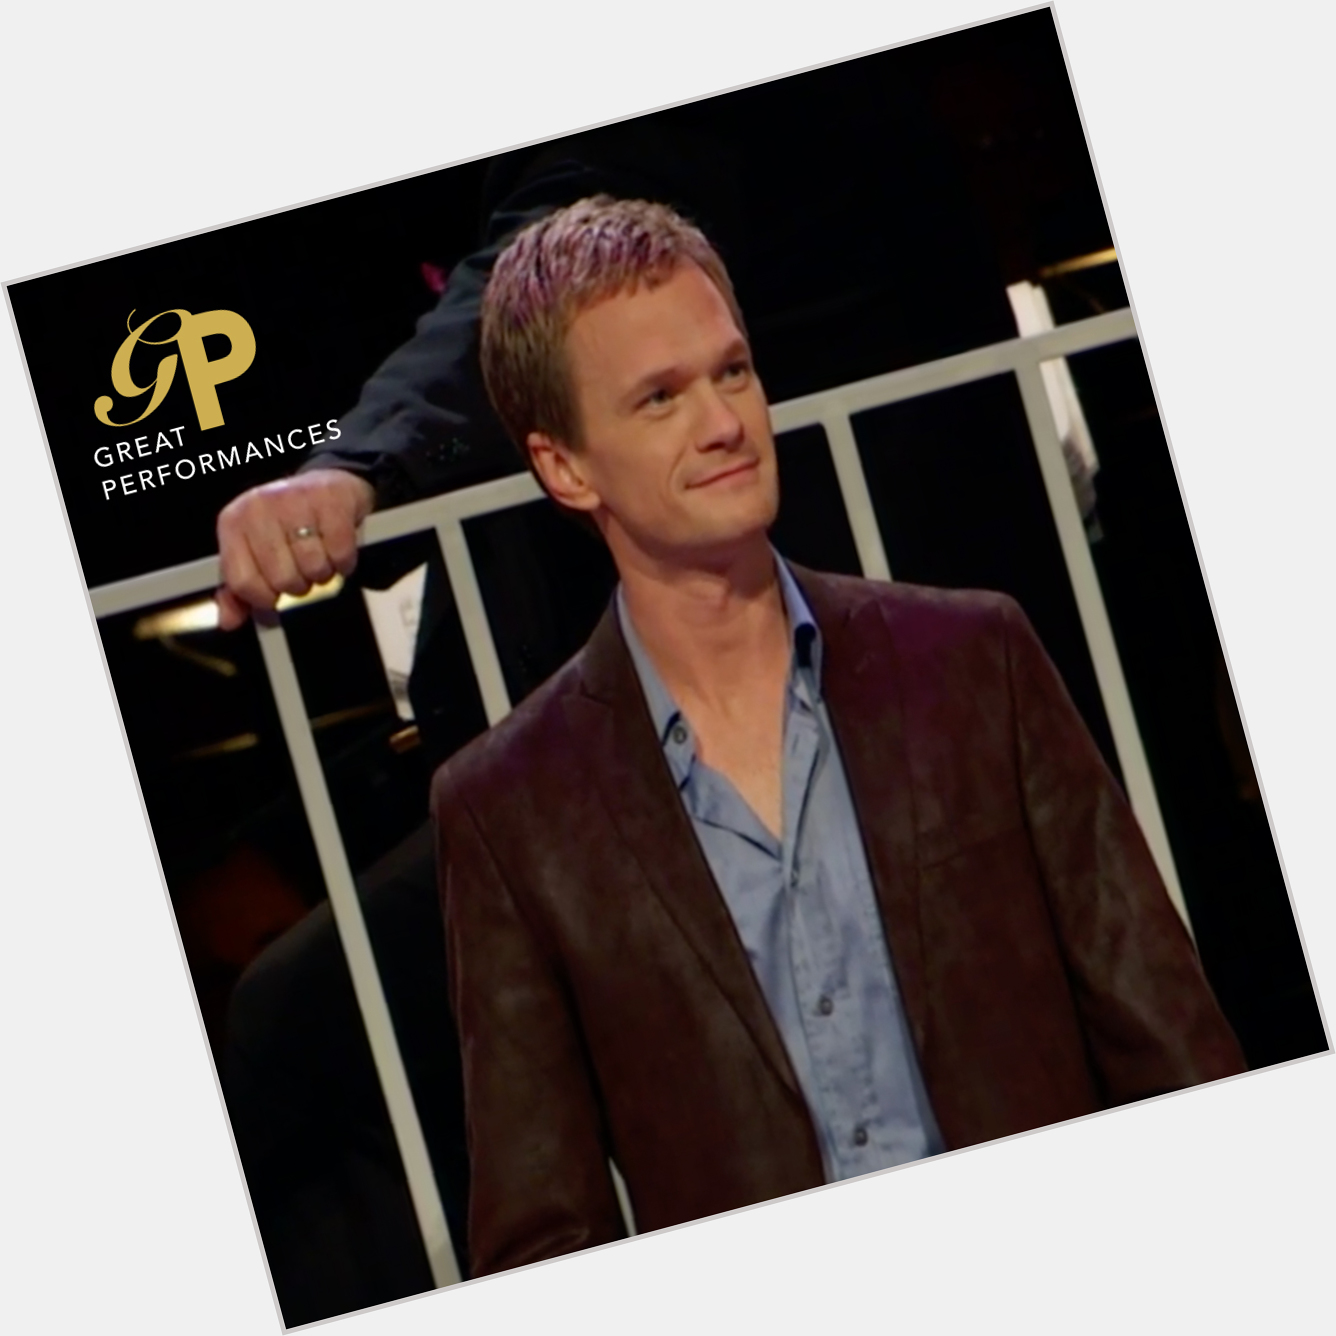 Happy birthday to Neil Patrick Harris. What are some of his most memorable roles? 